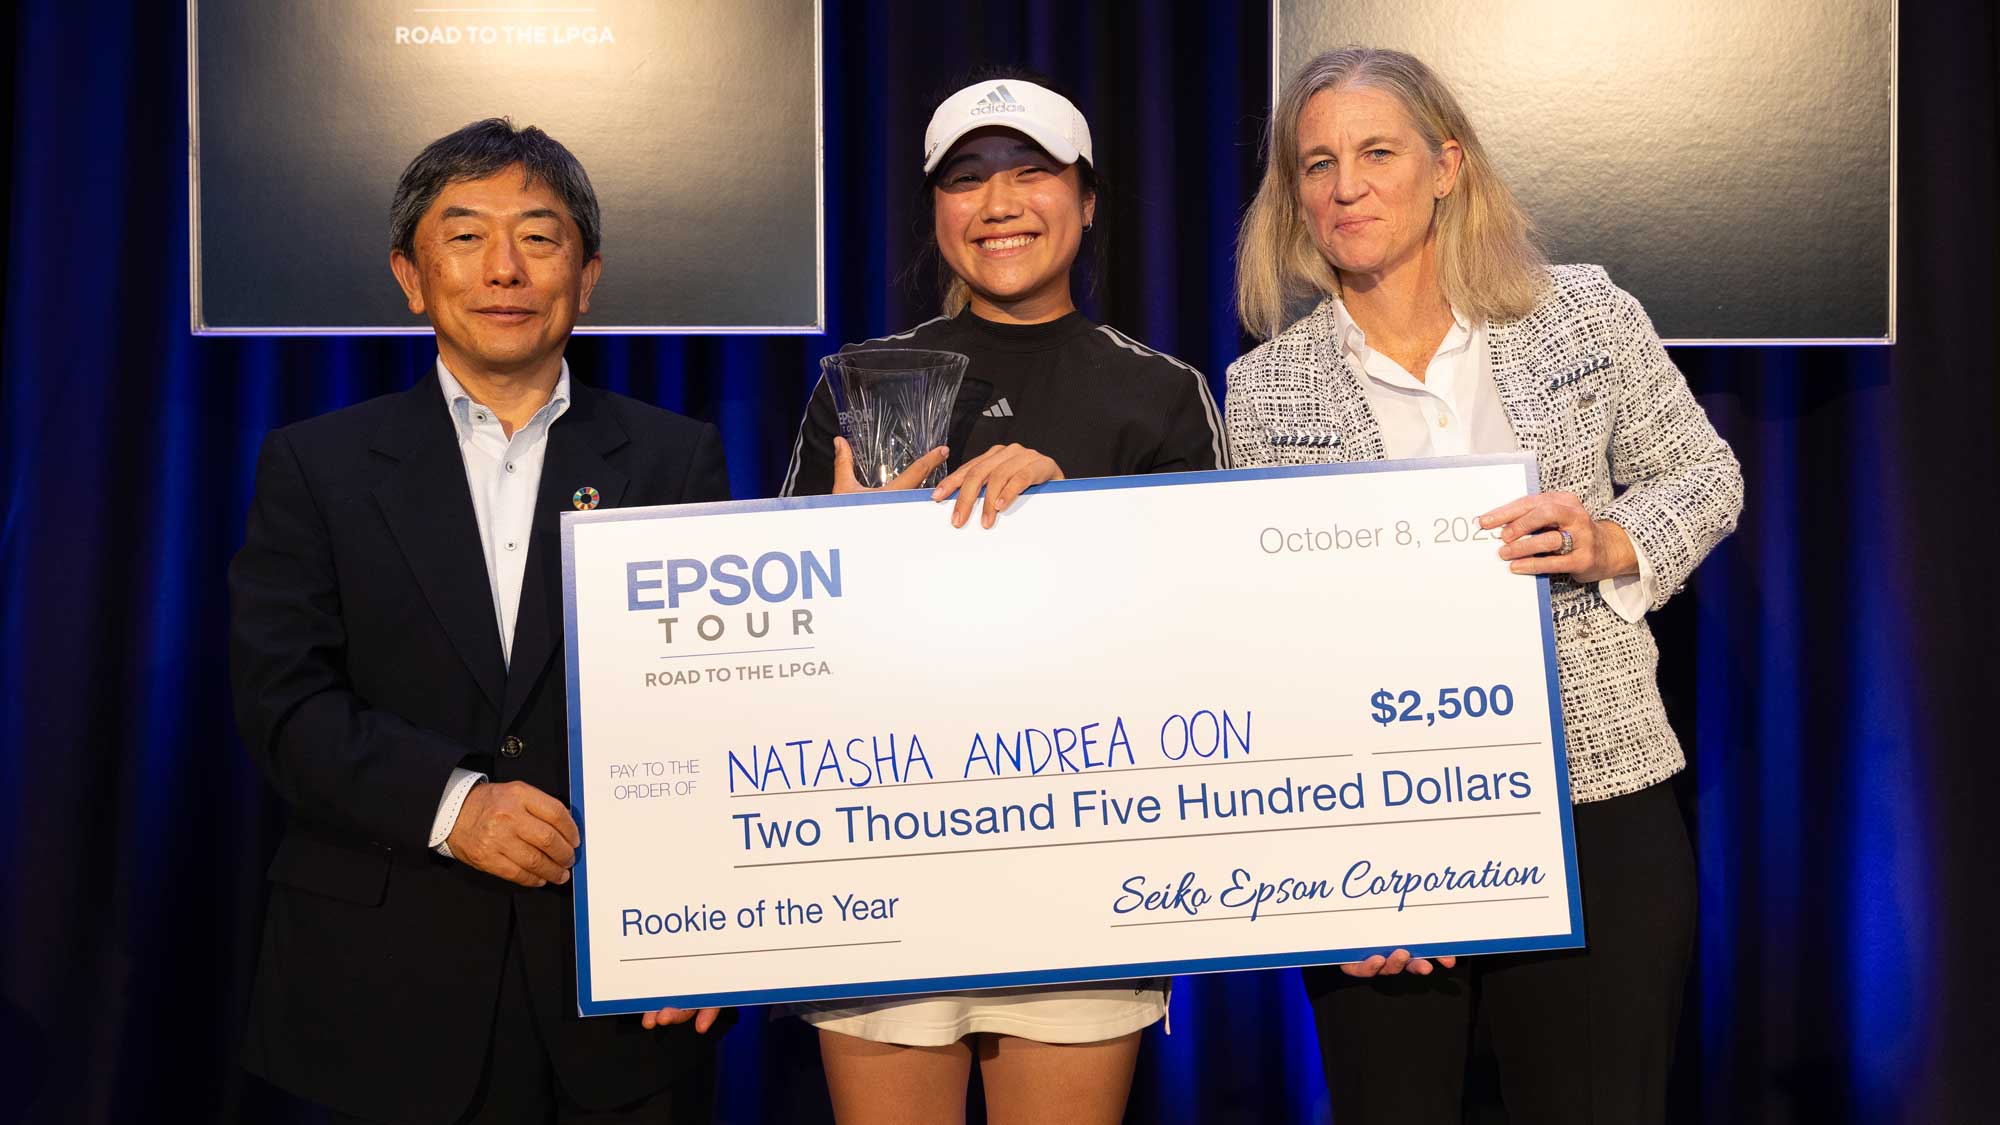 Natasha Andrea Oon with trophy and check